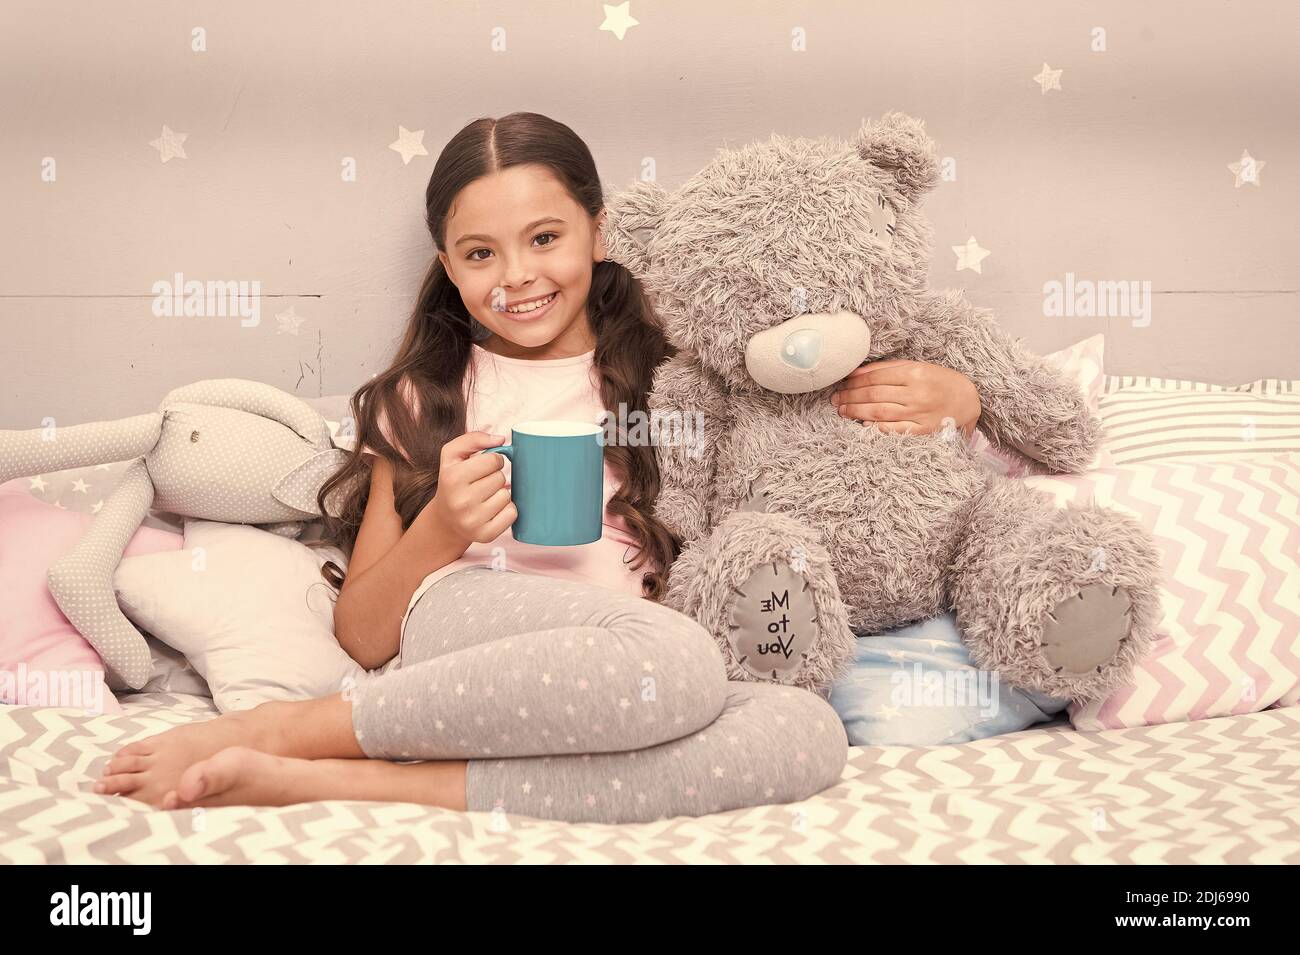 Drinking milk just before bed. Bedtime beverage. Hot milk before sleep. Health Benefits Drinking water before bed. Little child hold mug. Girl in pajamas drinking tea. Relaxation before sleep. Stock Photo